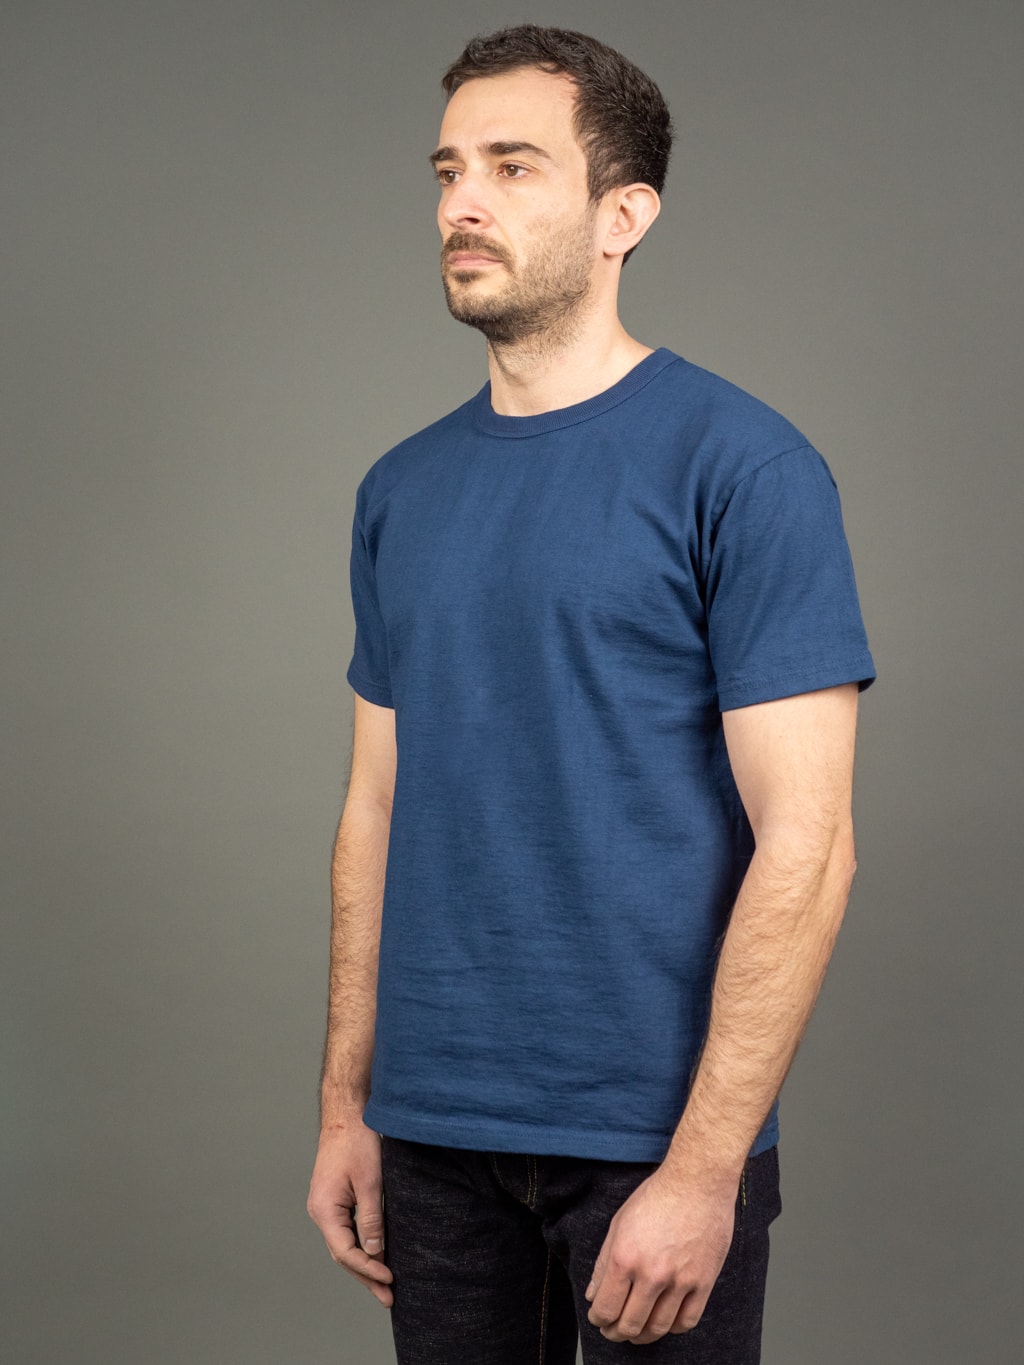 The Strike Gold Loopwheeled TShirt Navy Side Fit